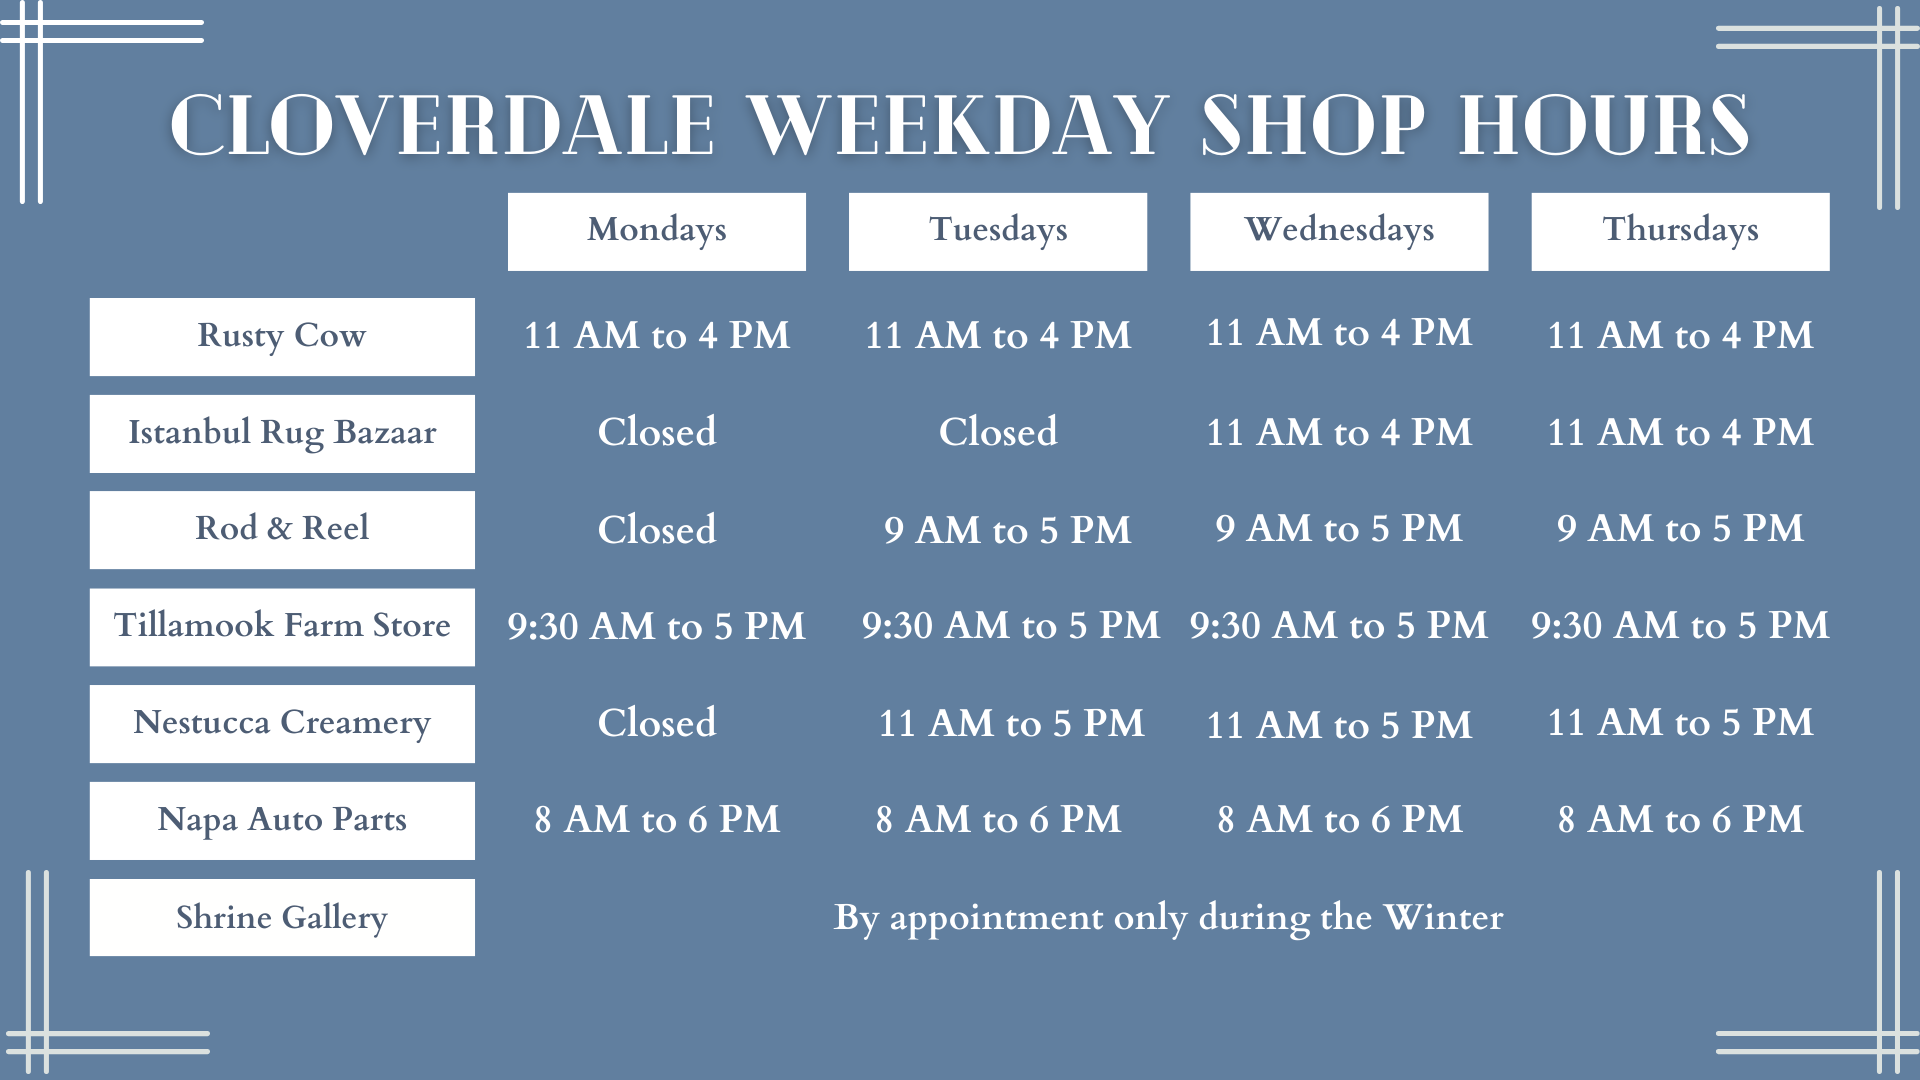 Cloverdale Oregon Shops and Hours Weekdays